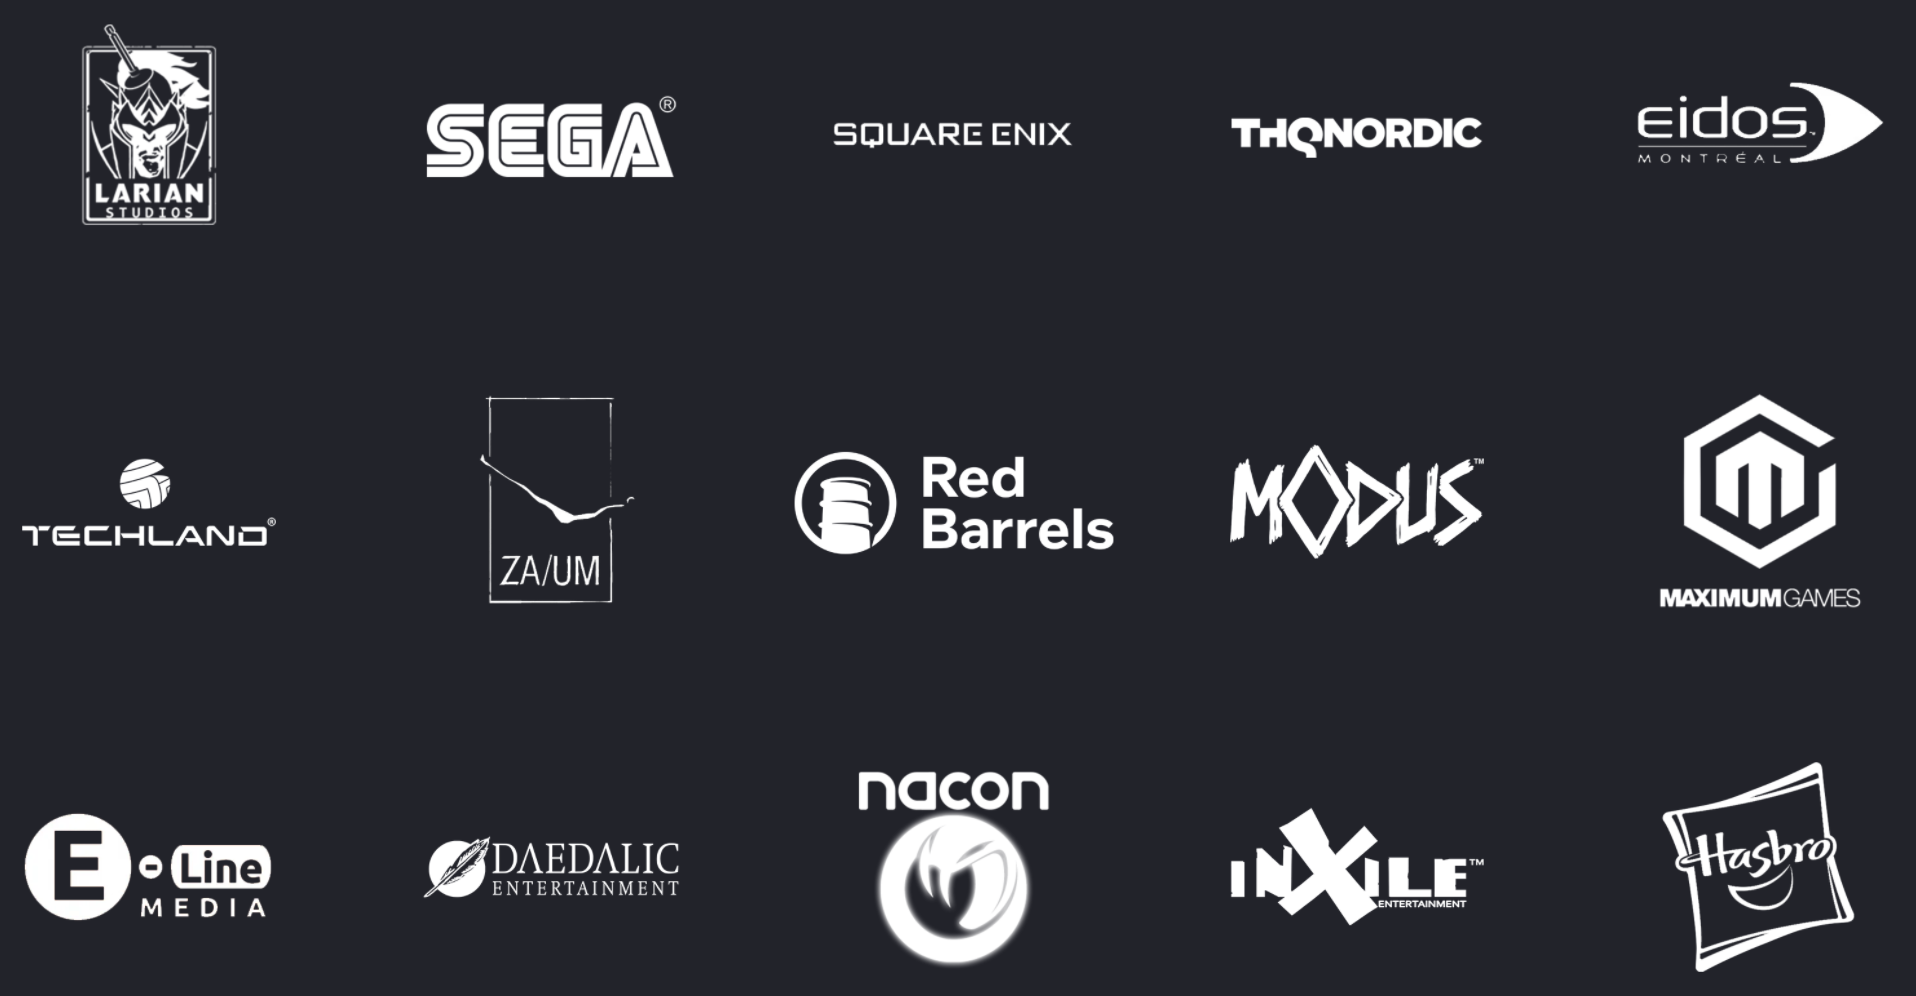 Logos of Dead Good's clients